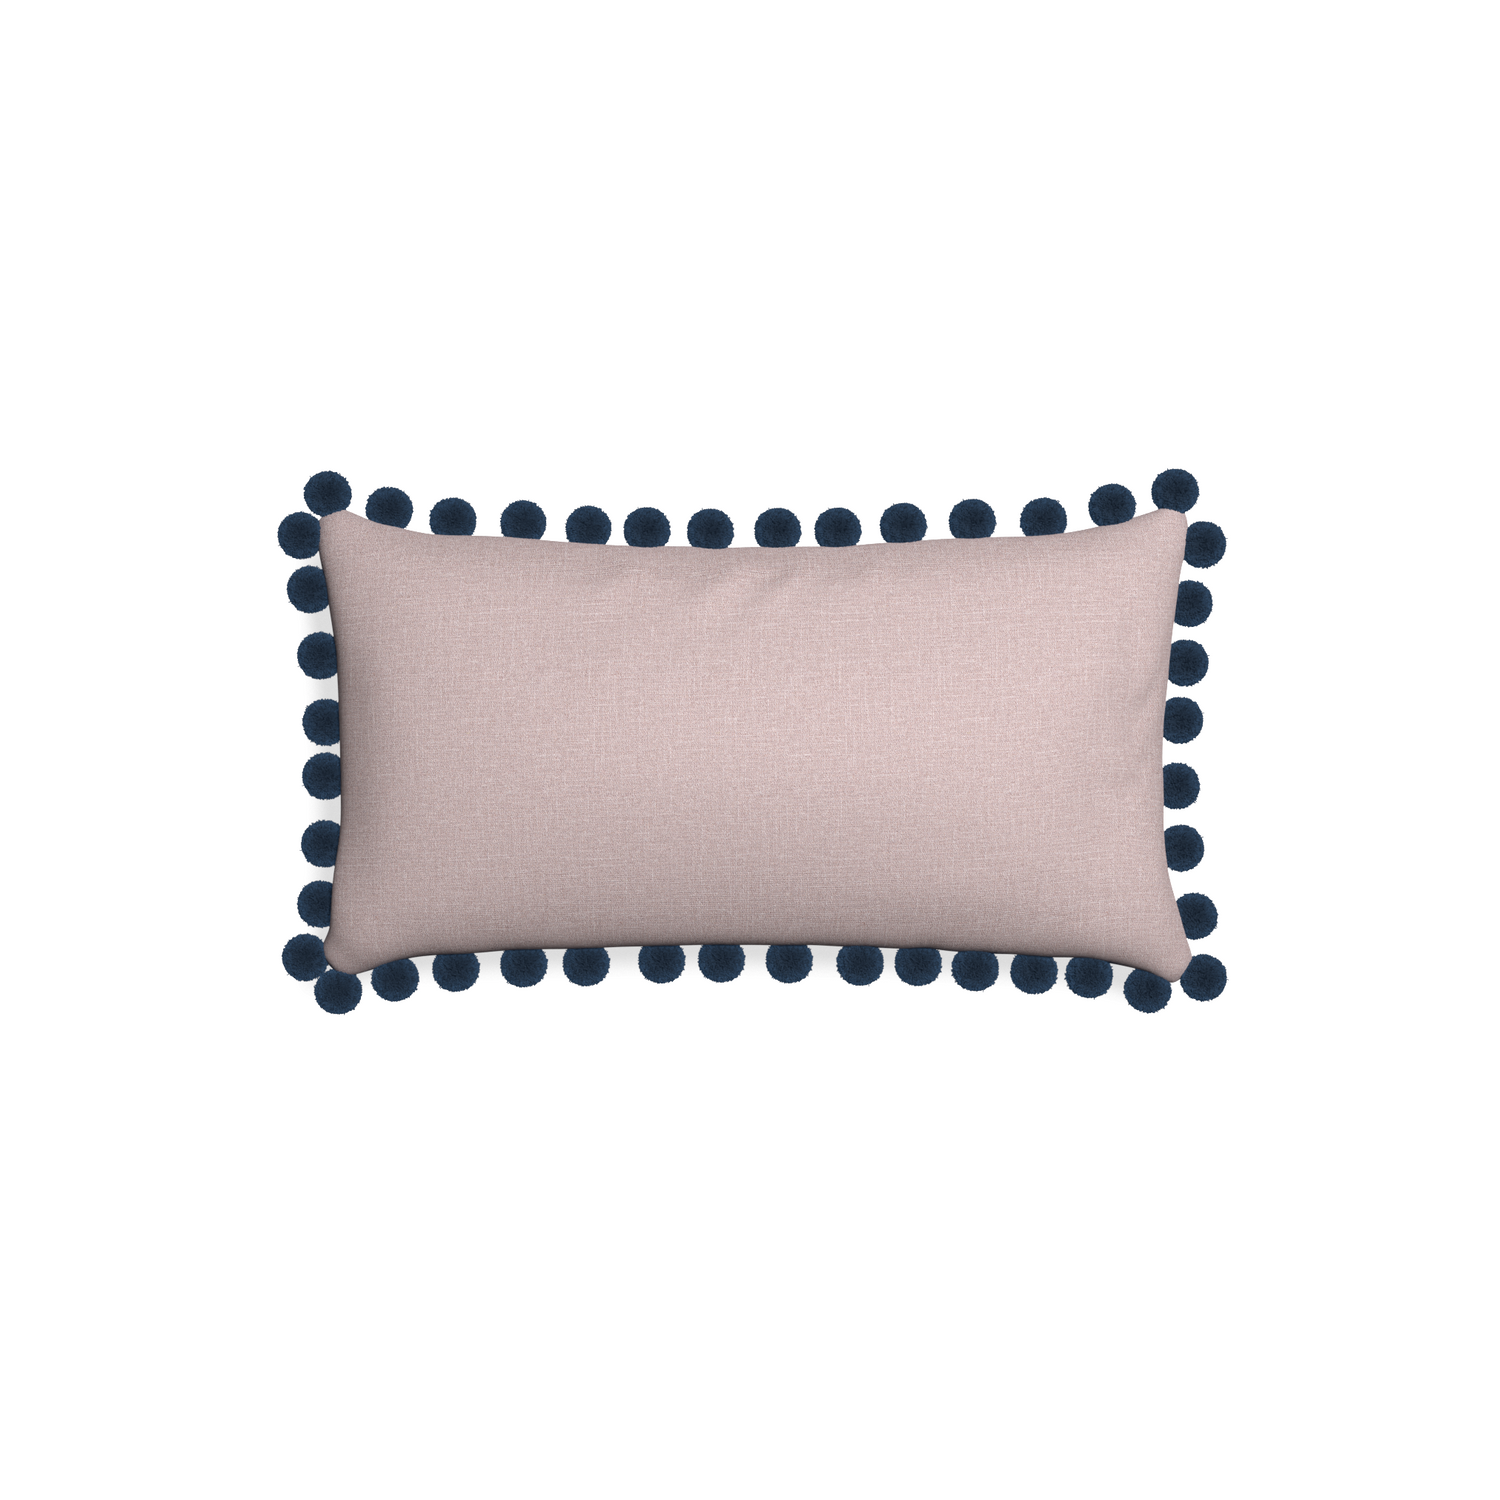 Petite-lumbar orchid custom mauve pinkpillow with c on white background